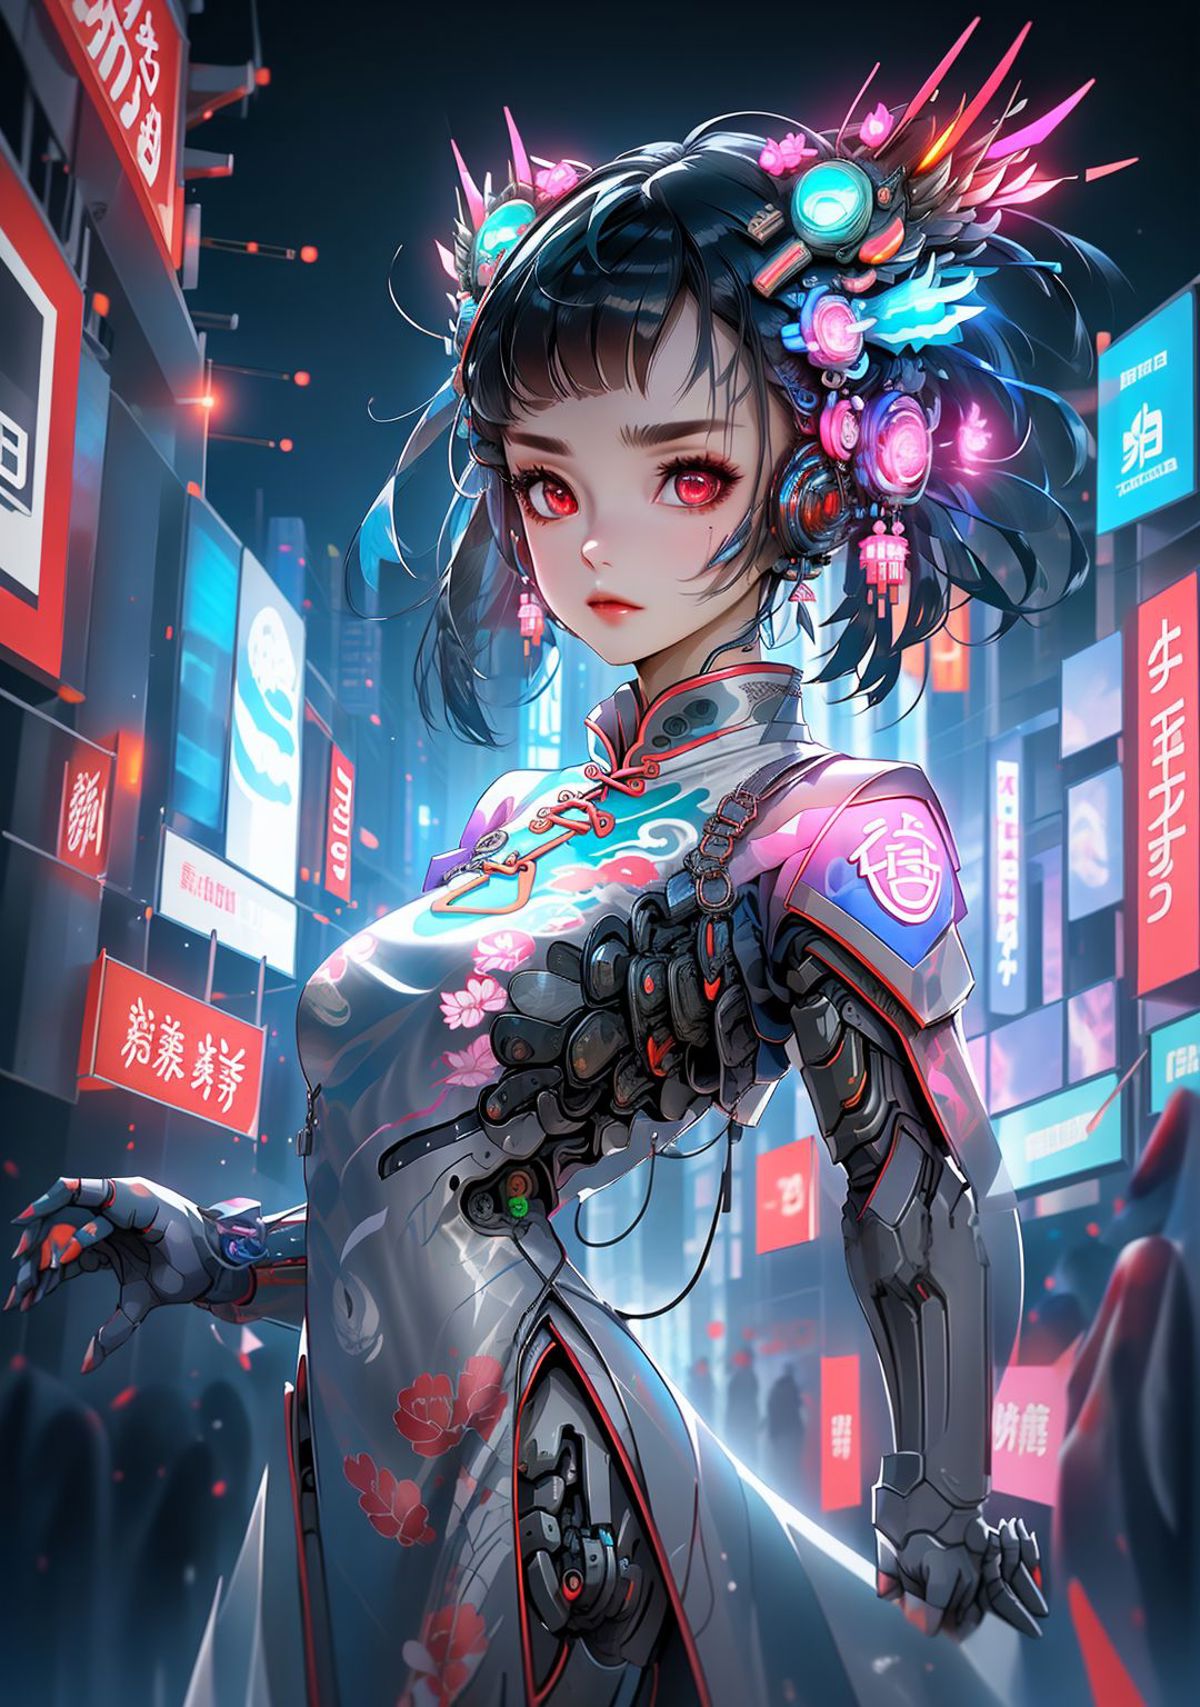 Cyberhanfu 赛博国风/Cyber Chinese style image by marusame